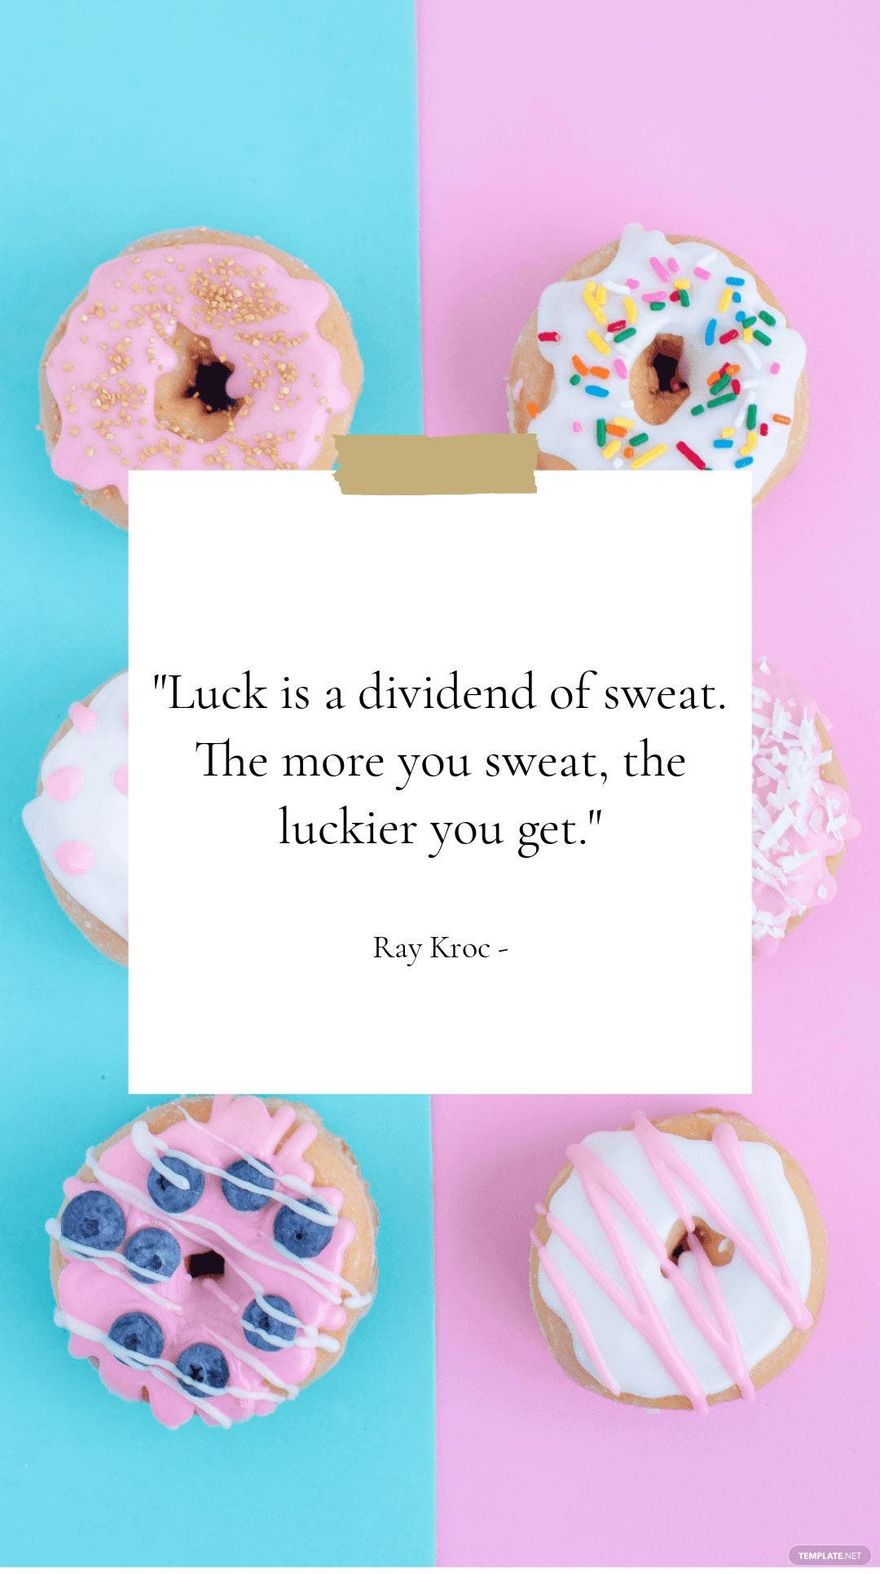 Ray Kroc - Luck is a dividend of sweat. The more you sweat, the luckier you get.